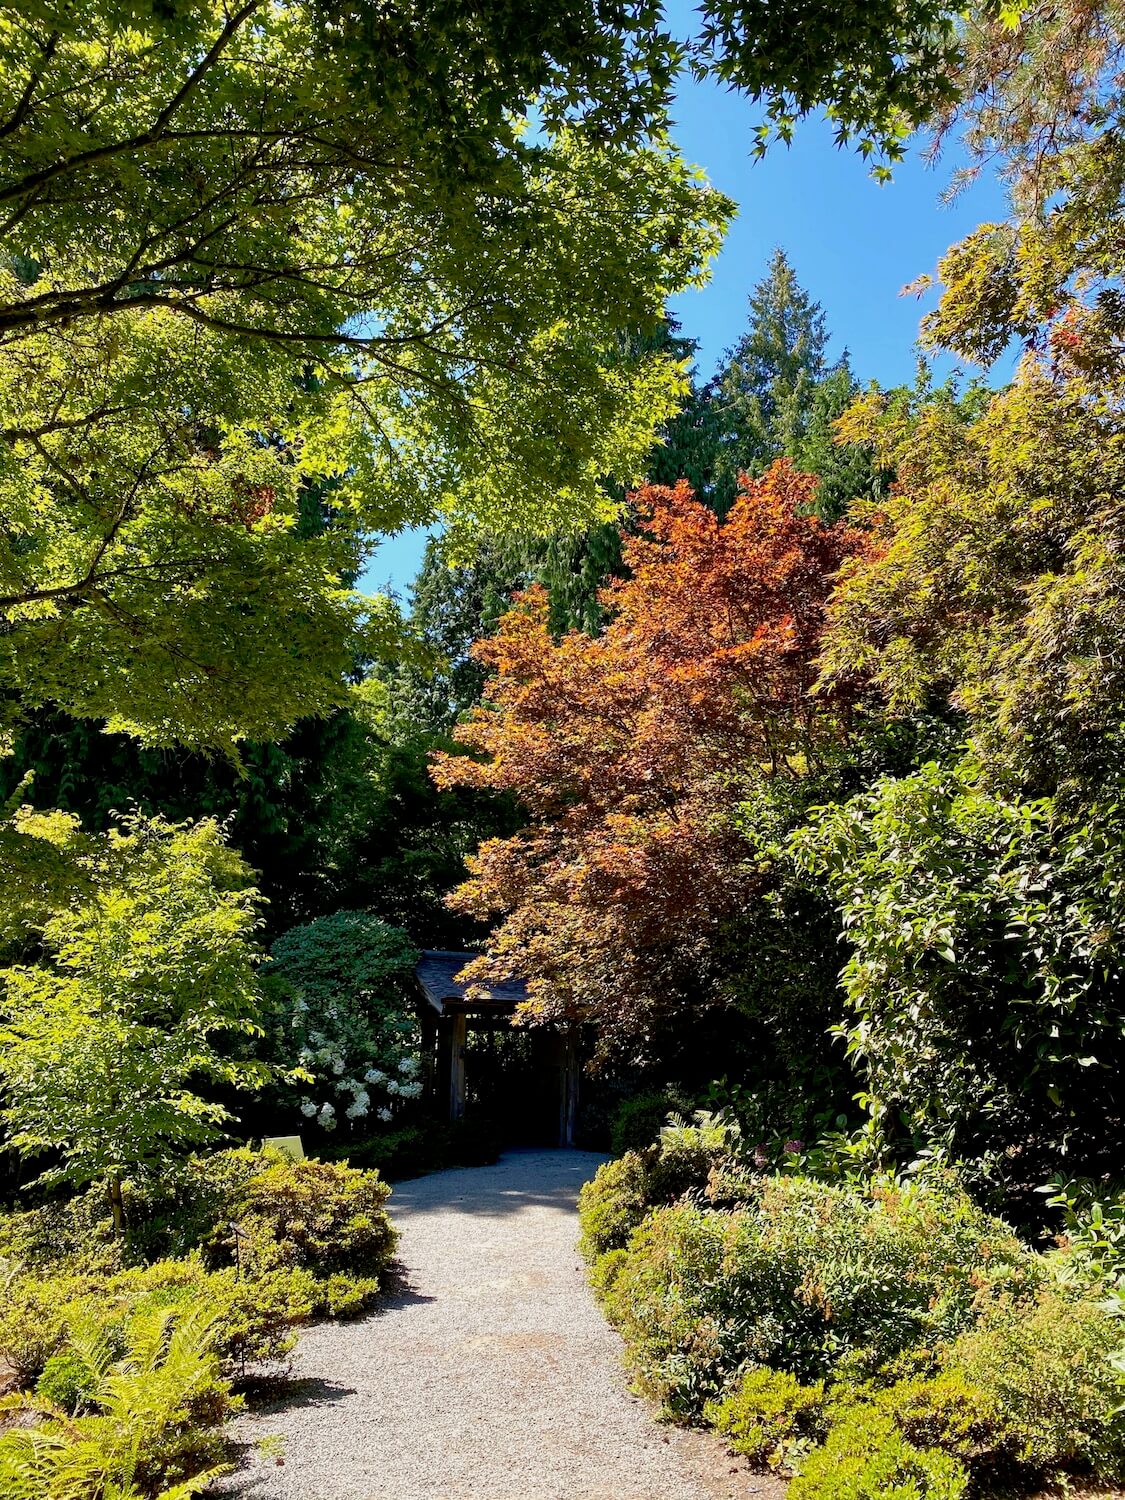 An array of trees with textures and colors come to life in the Japanese garden in Bellevue Botanical Gardens. A pea gravel path cuts through the center of the shot and leads to a bushy tree with bright red leaves while a patch of blue sky opens up at the top of the shot.